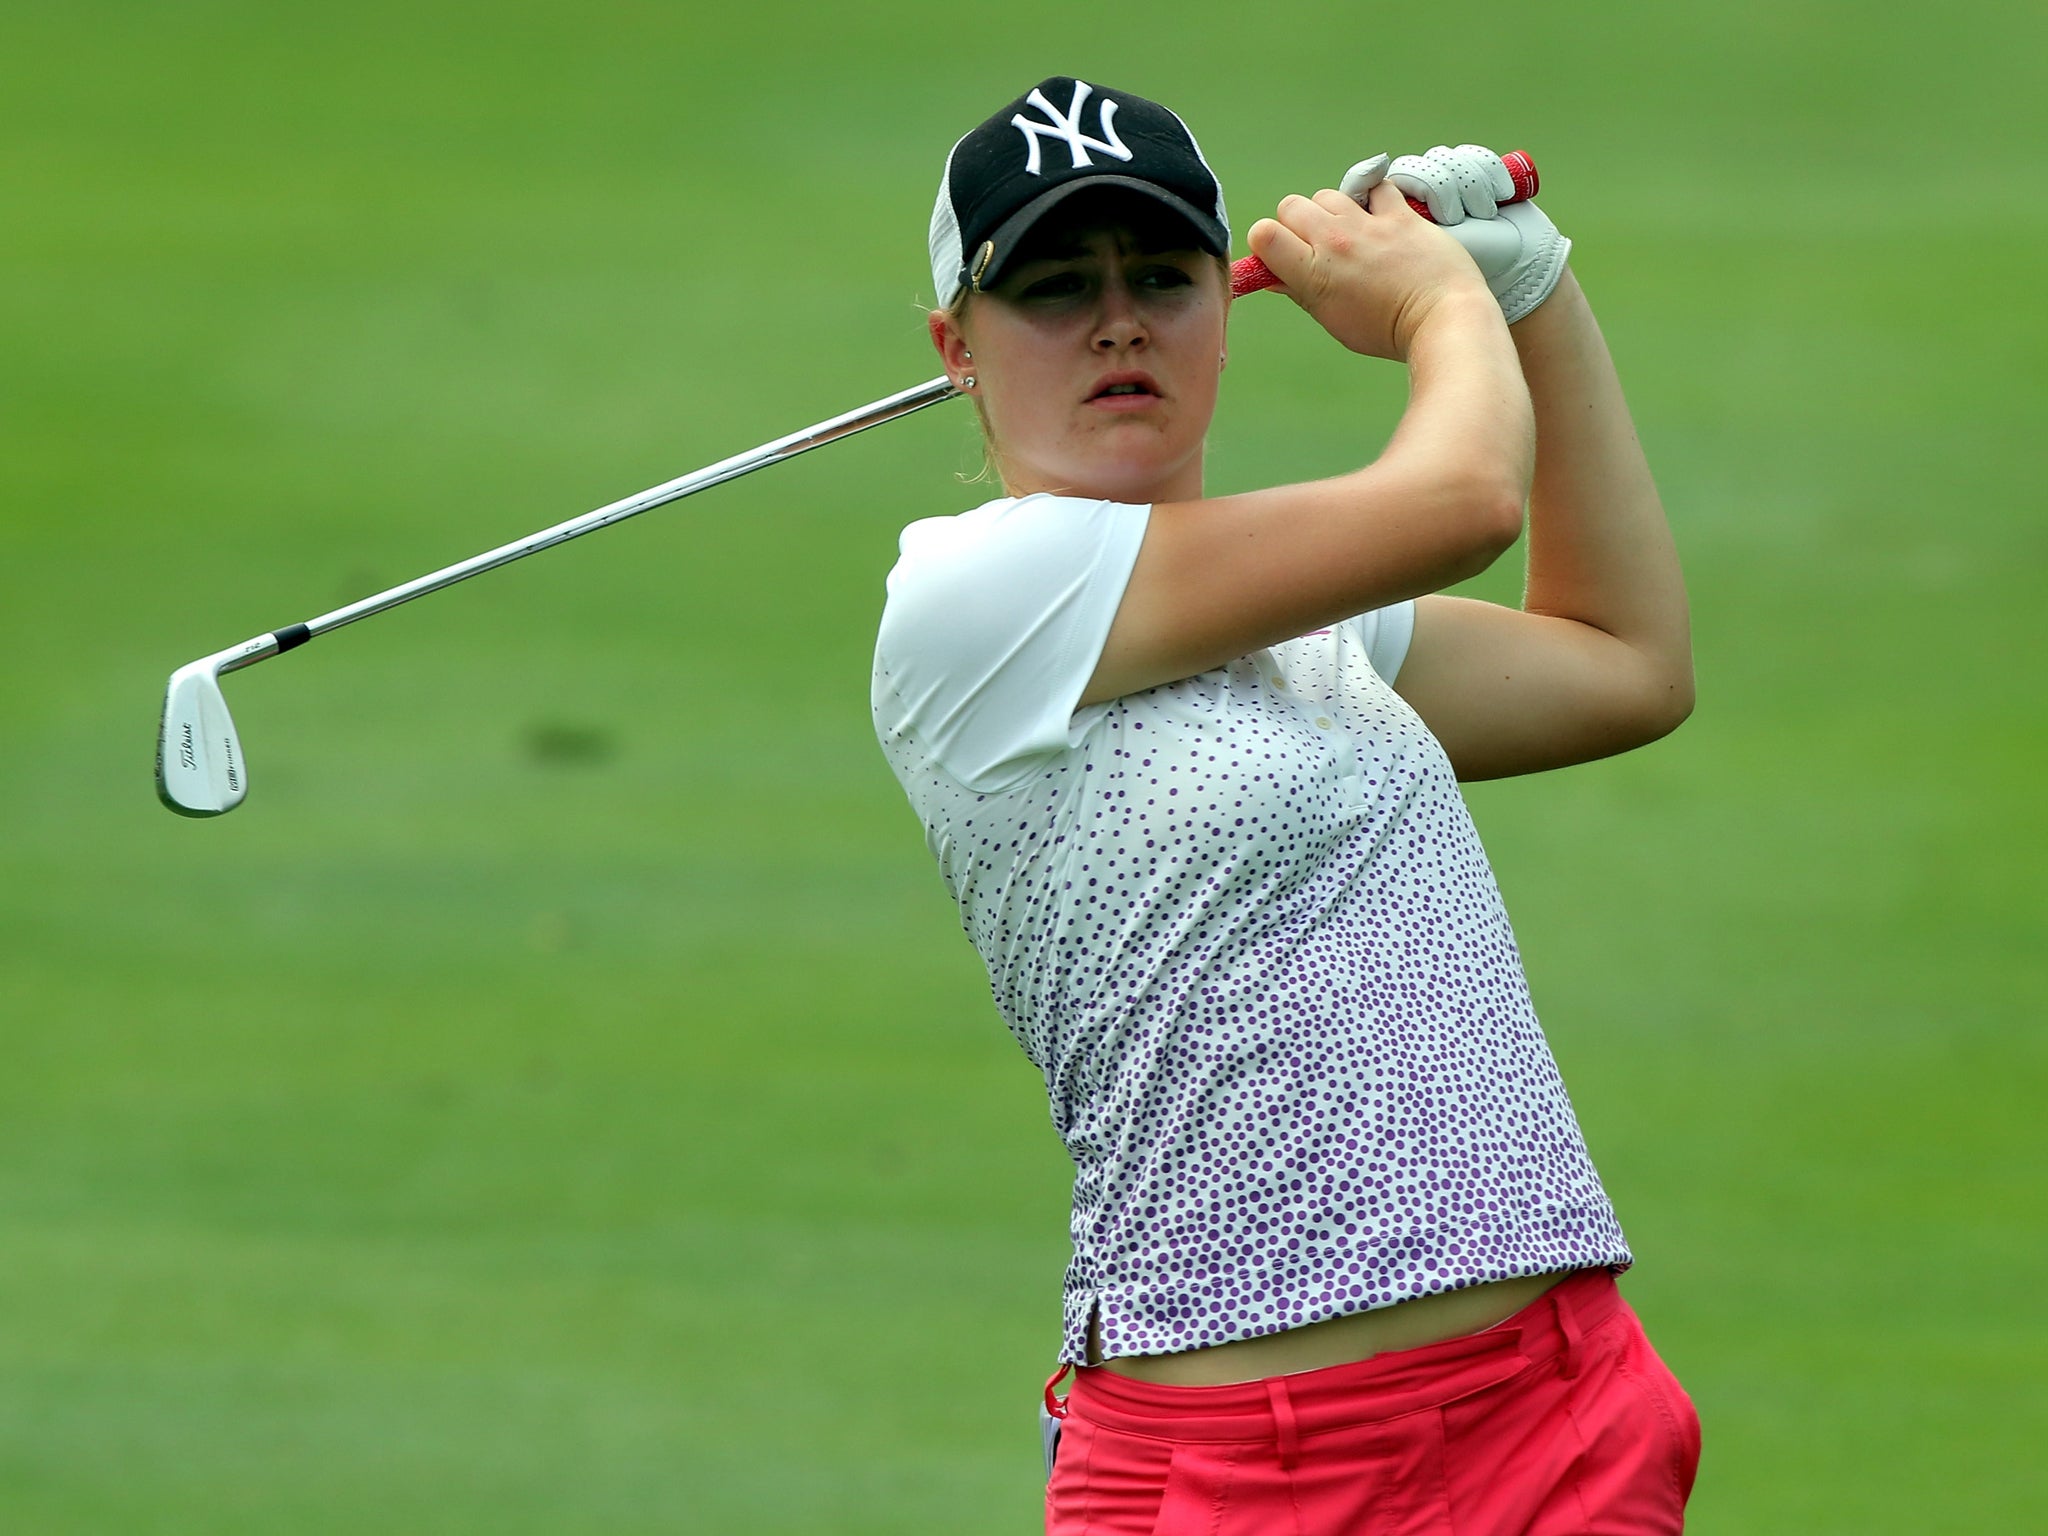 17-year-old golfer Charley Hull was part of the successful 2013 Solheim Cup team, winning two of her three available points in her first appearance